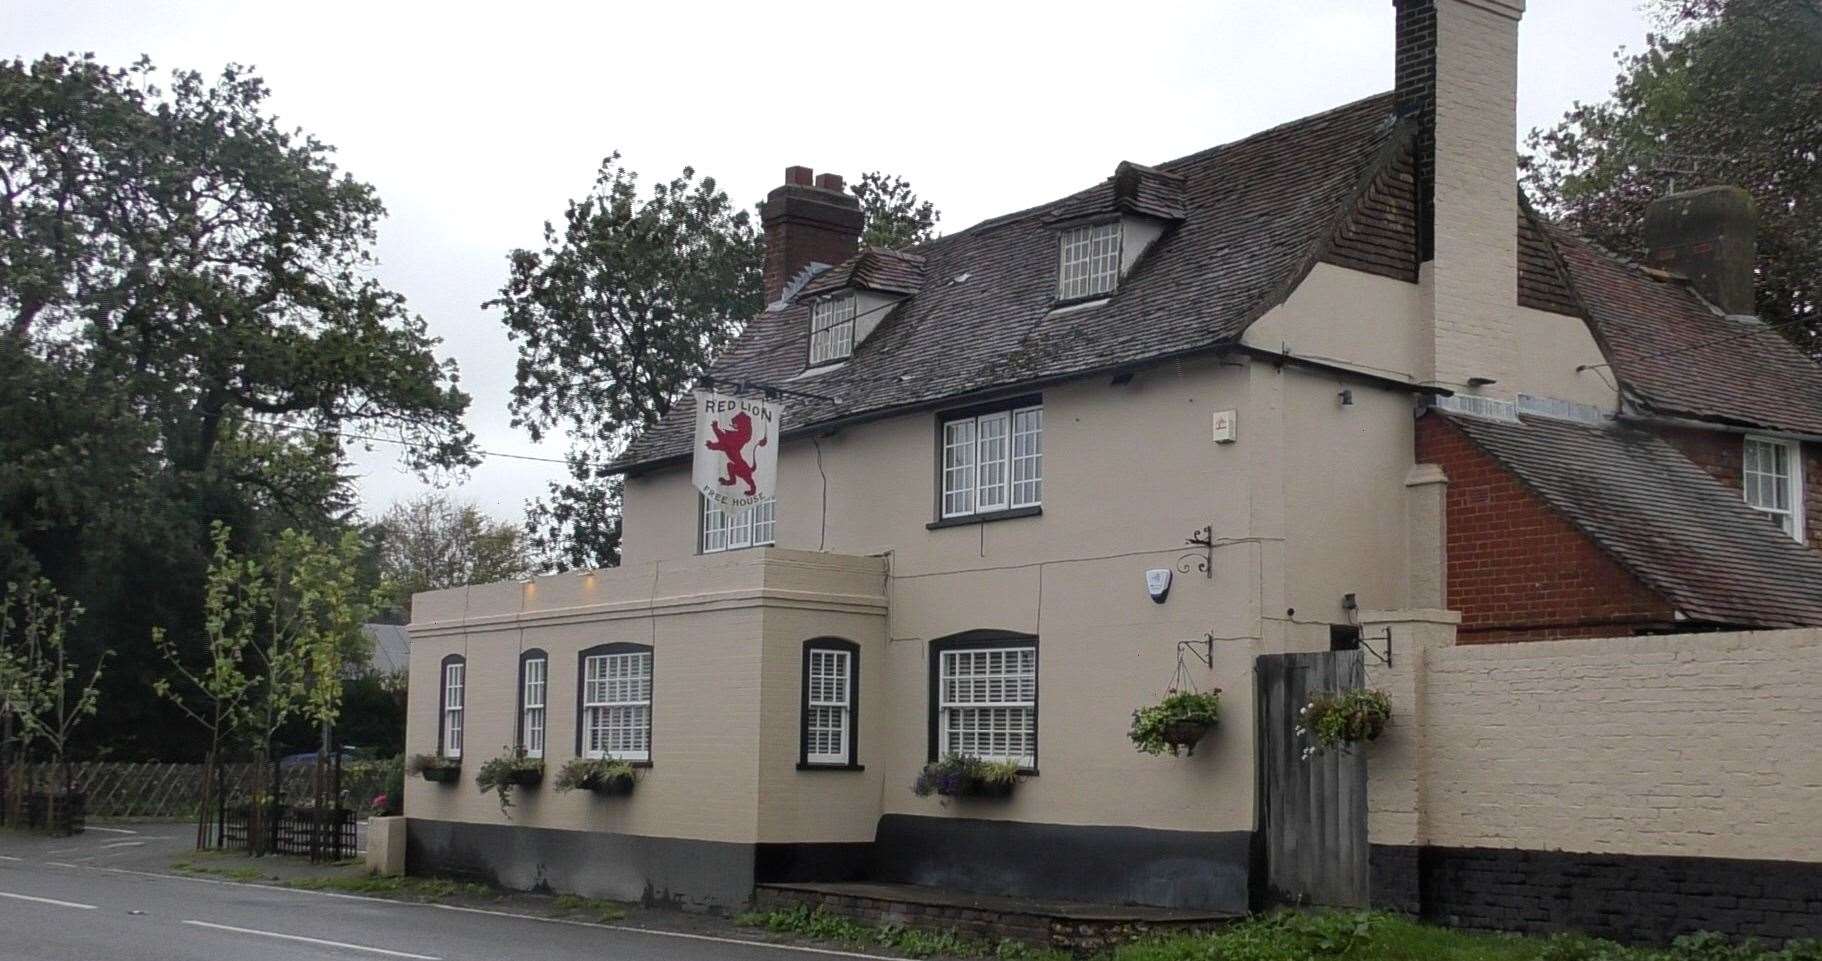 The Red Lion, Badlesmere